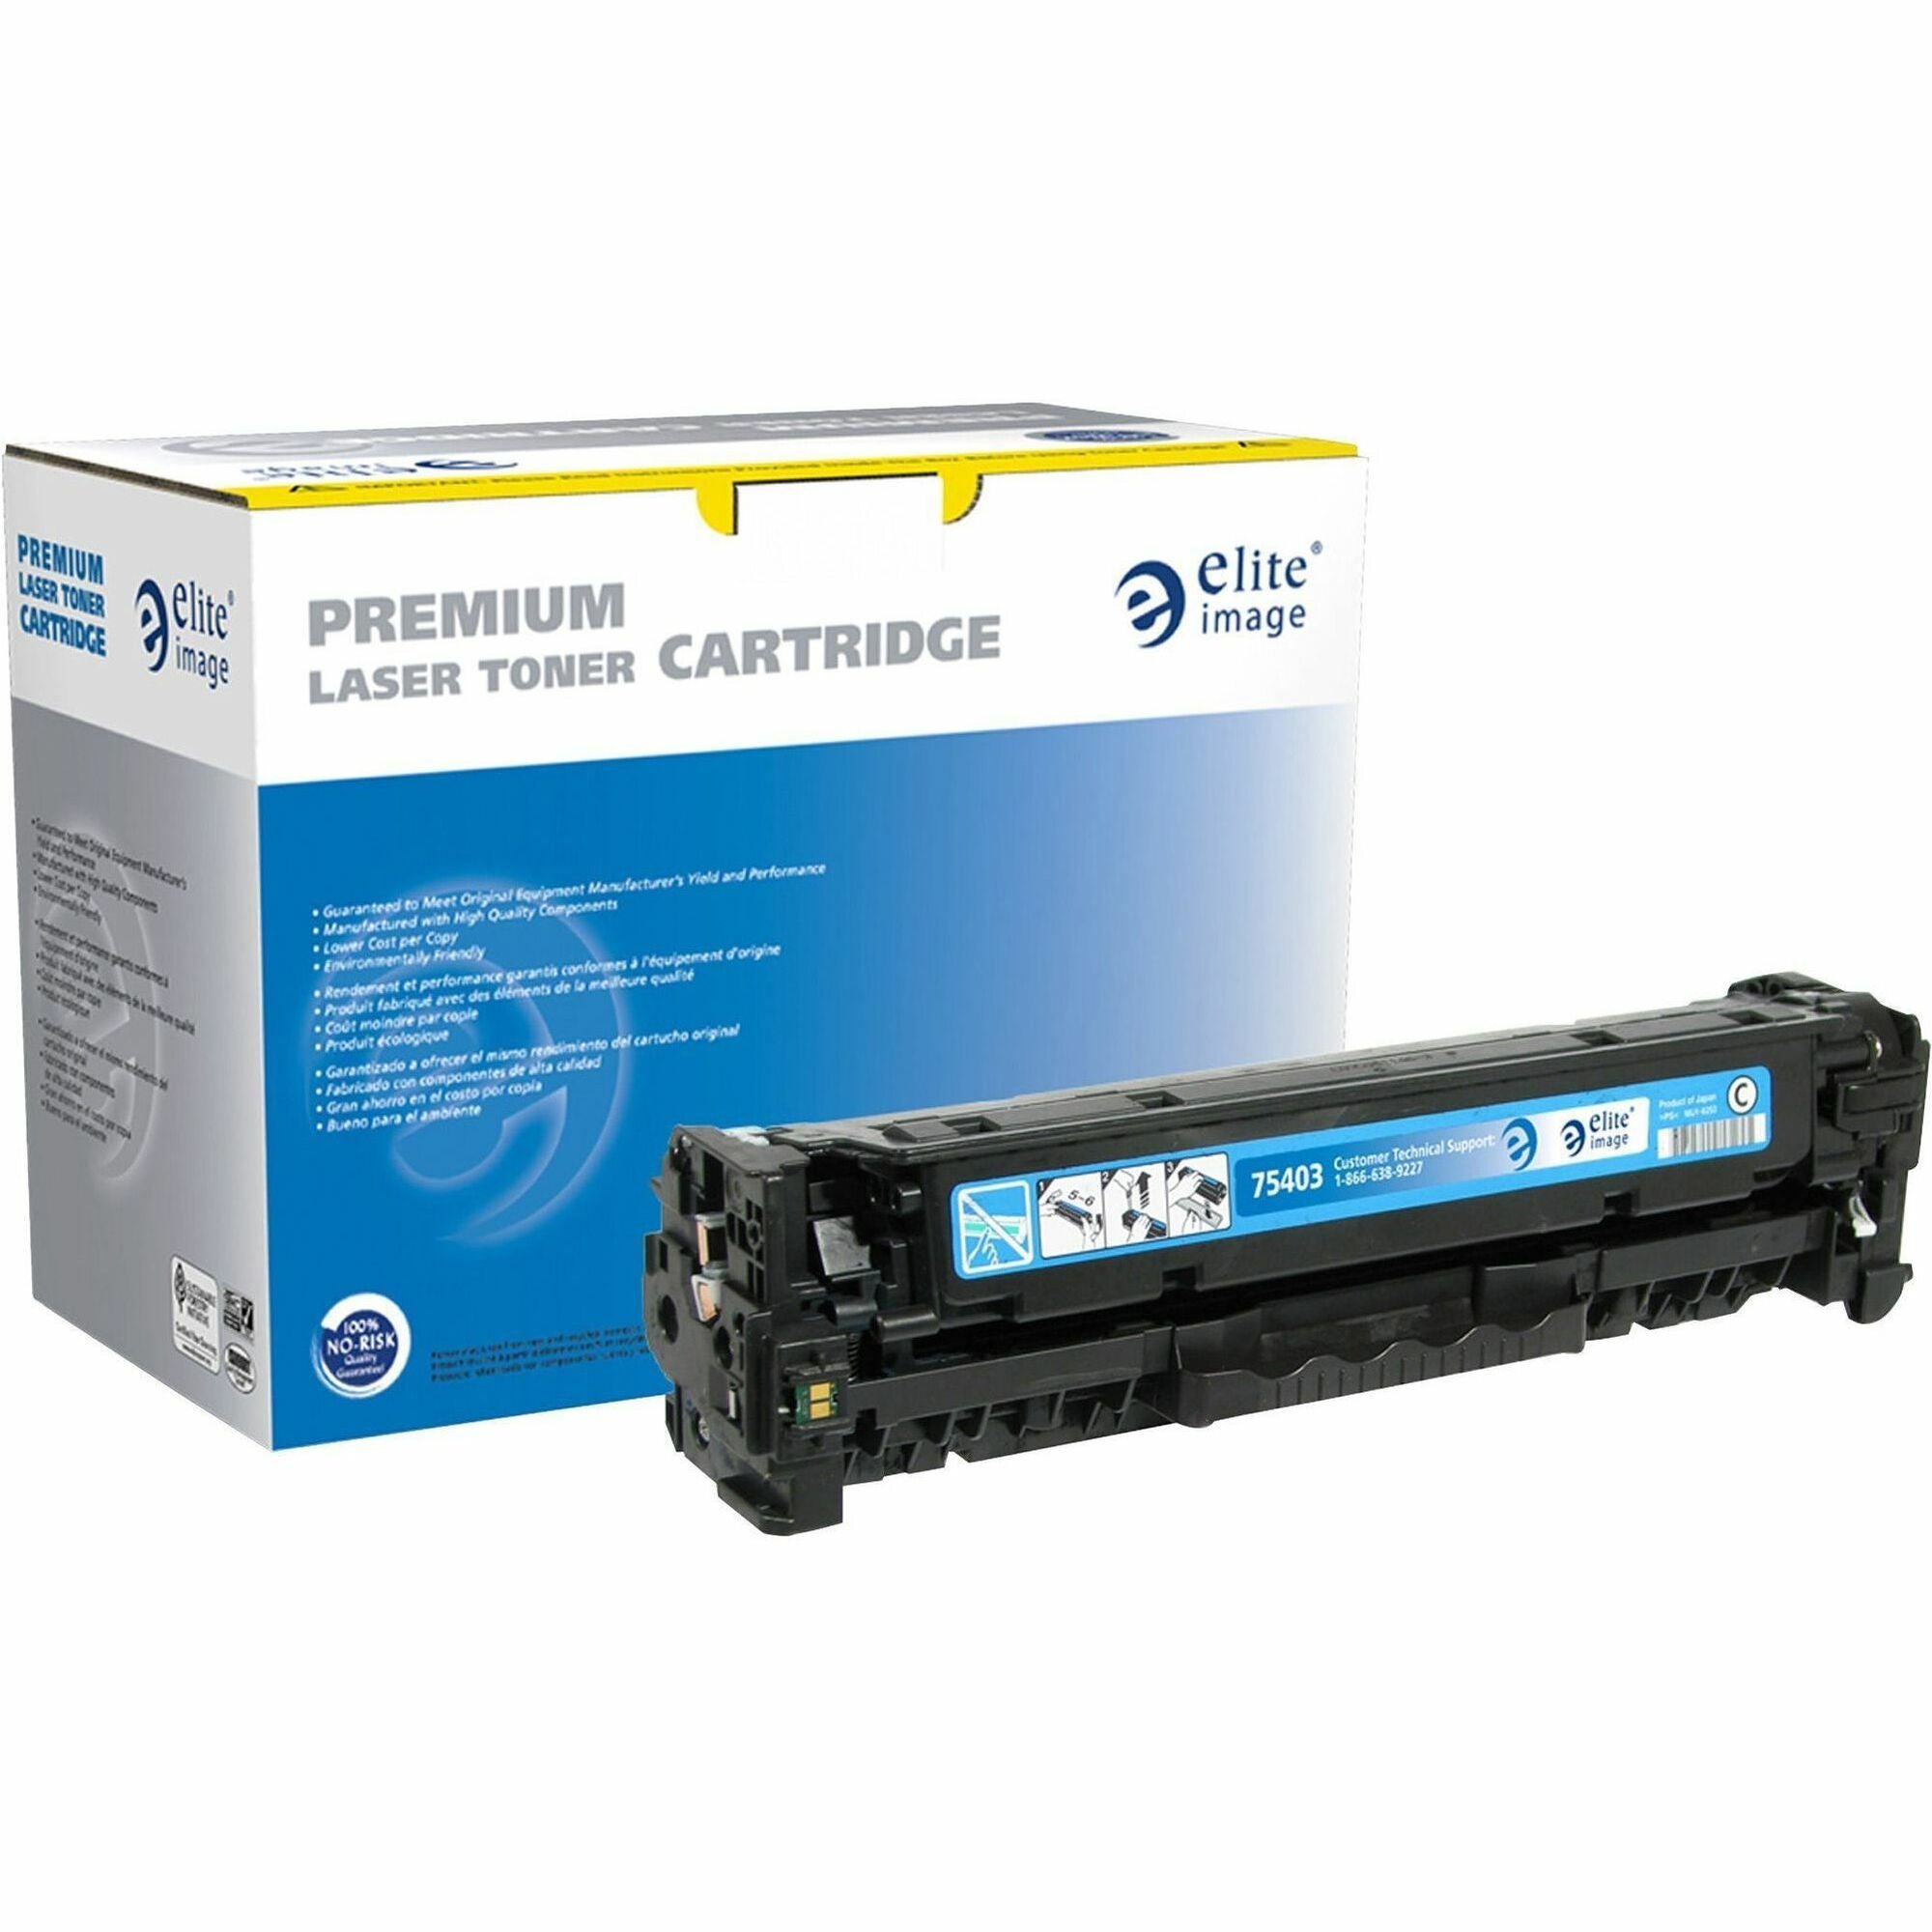 Elite Image Remanufactured Laser Toner Cartridge - Alternative for HP 304A (CC531A) - Cyan - 1 Each - 2800 Pages - 